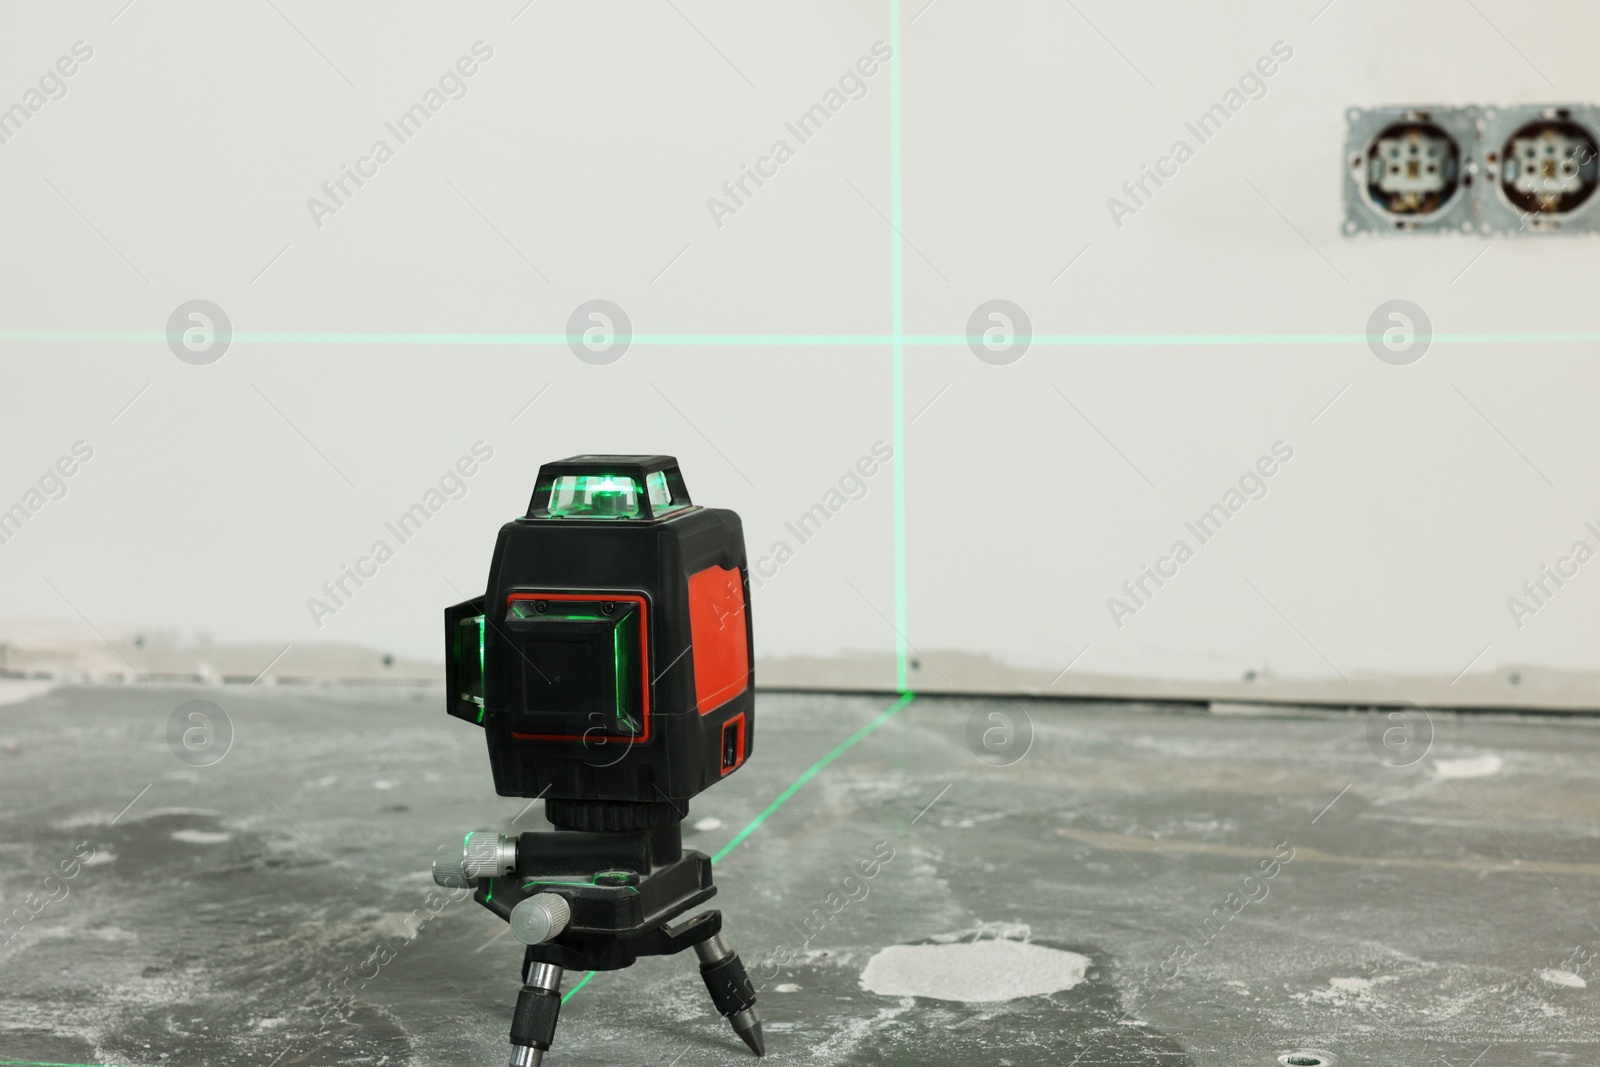 Photo of Laser level on floor near electrical sockets